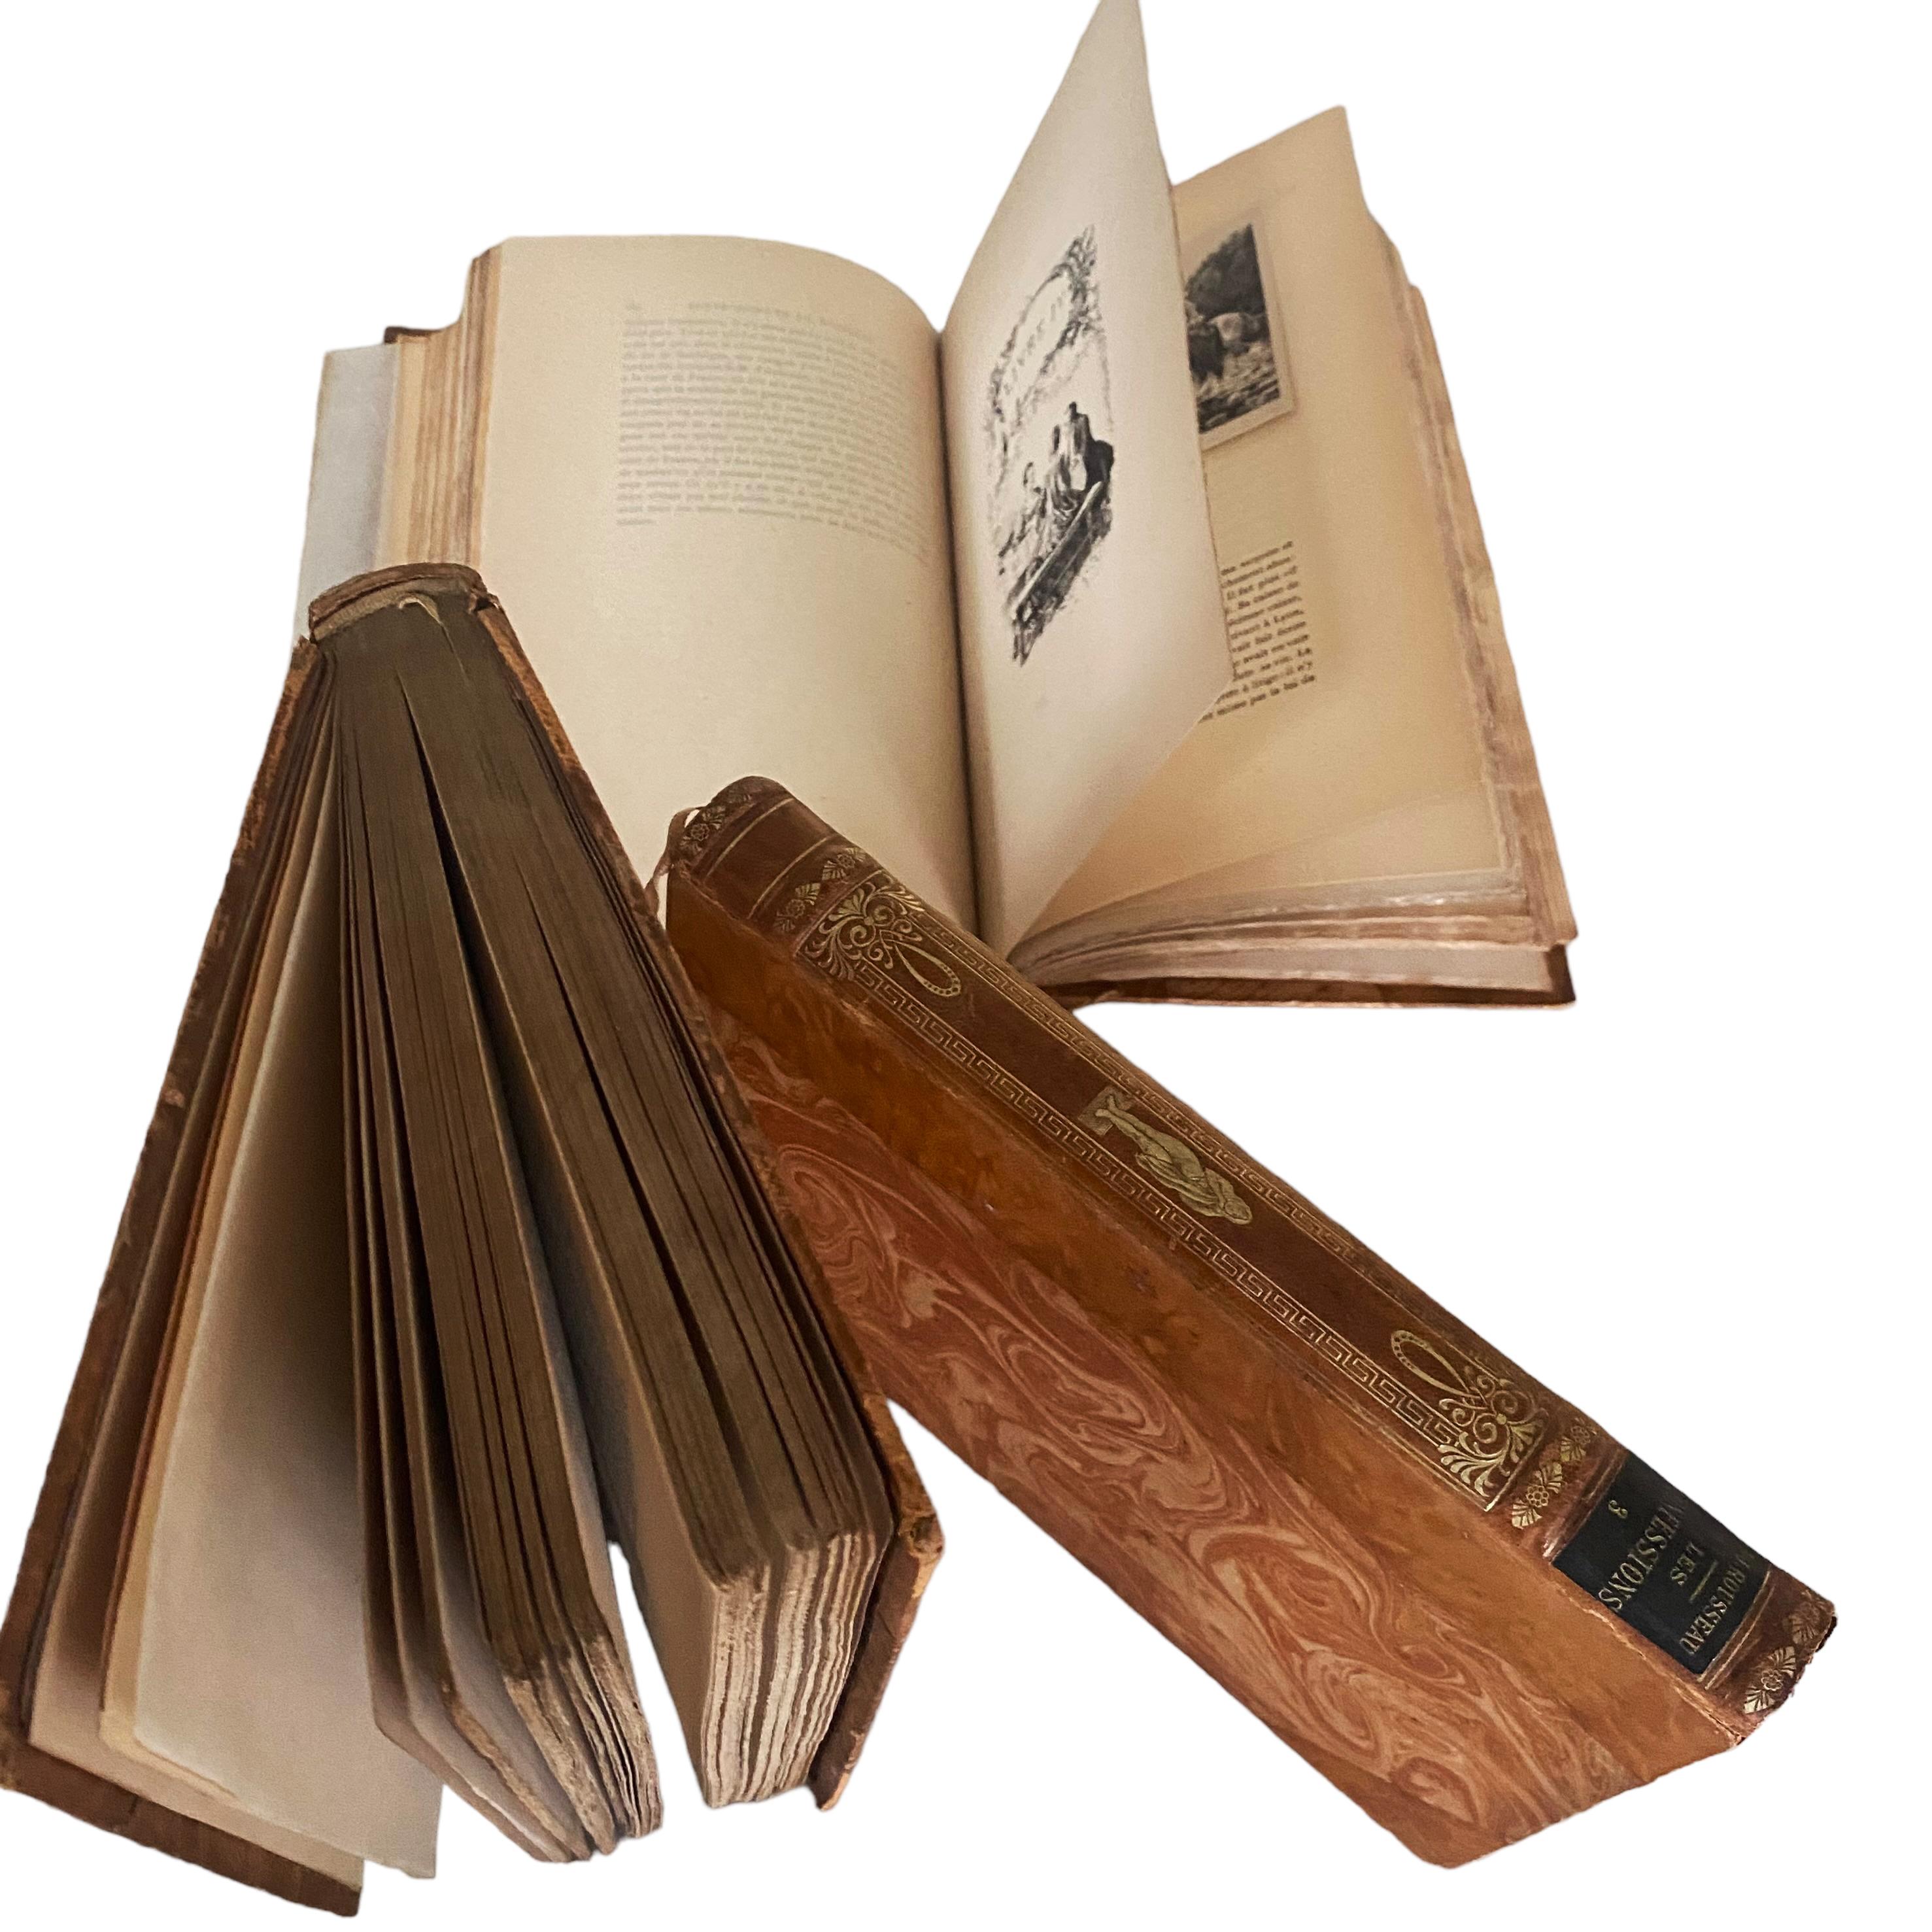 Les Confessions French Antique Books by J-J ROUSSEAU Leather Bound 3 Volumes  In Good Condition For Sale In Boston, MA